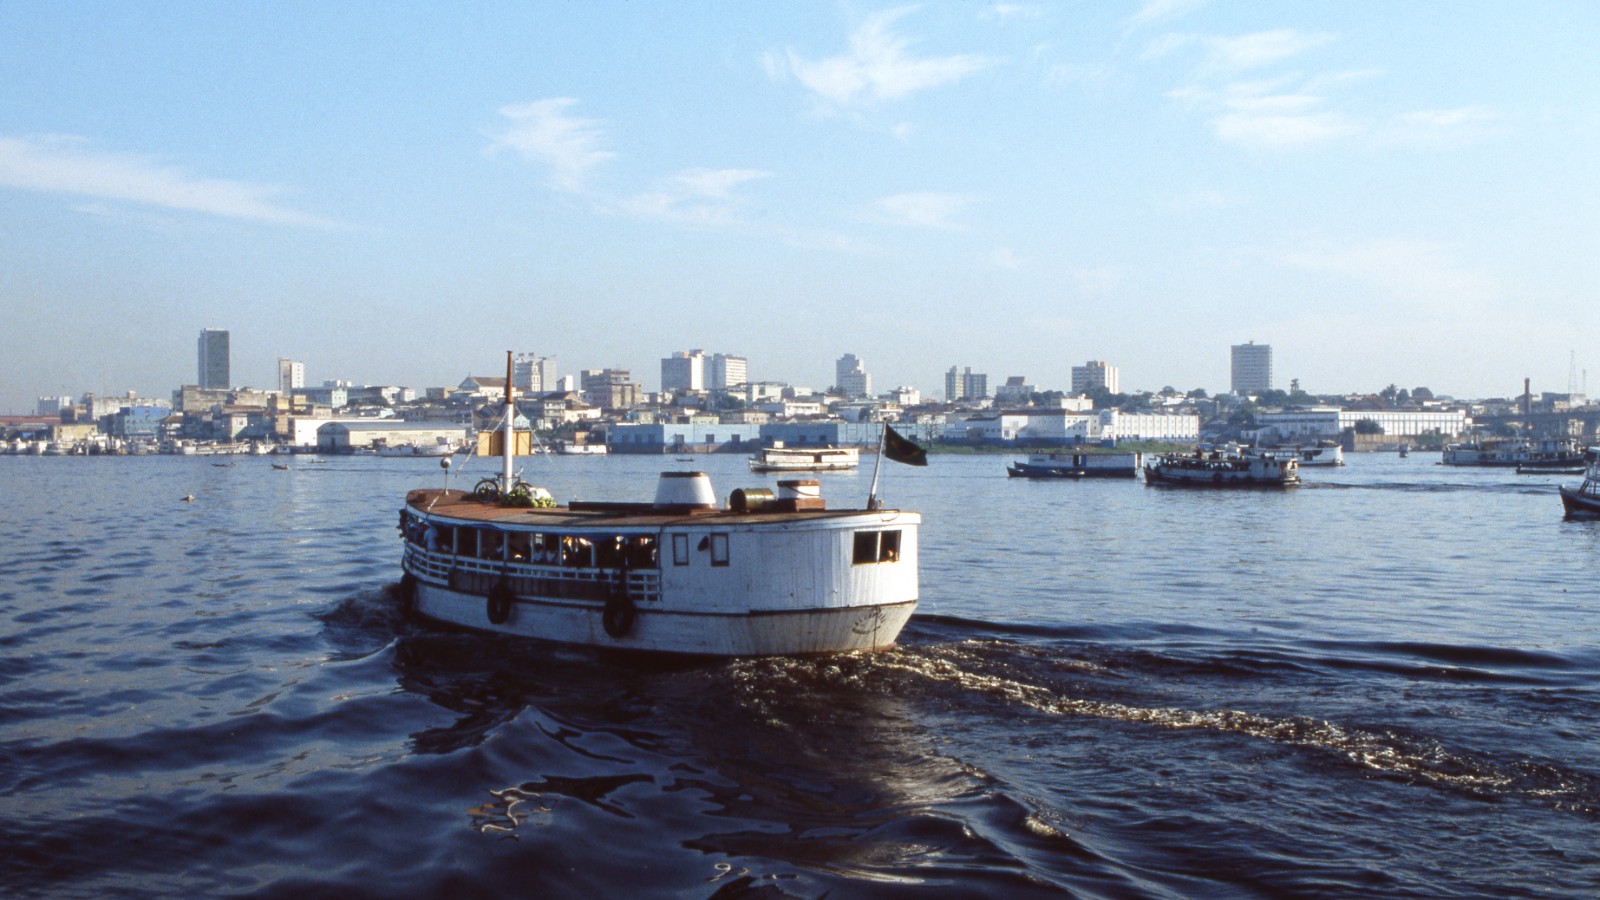 In this image you see a white ferry full of tourists traveling on the Amazon River.  In the background you can see the silhouette of the city of Manaus, Brazil.